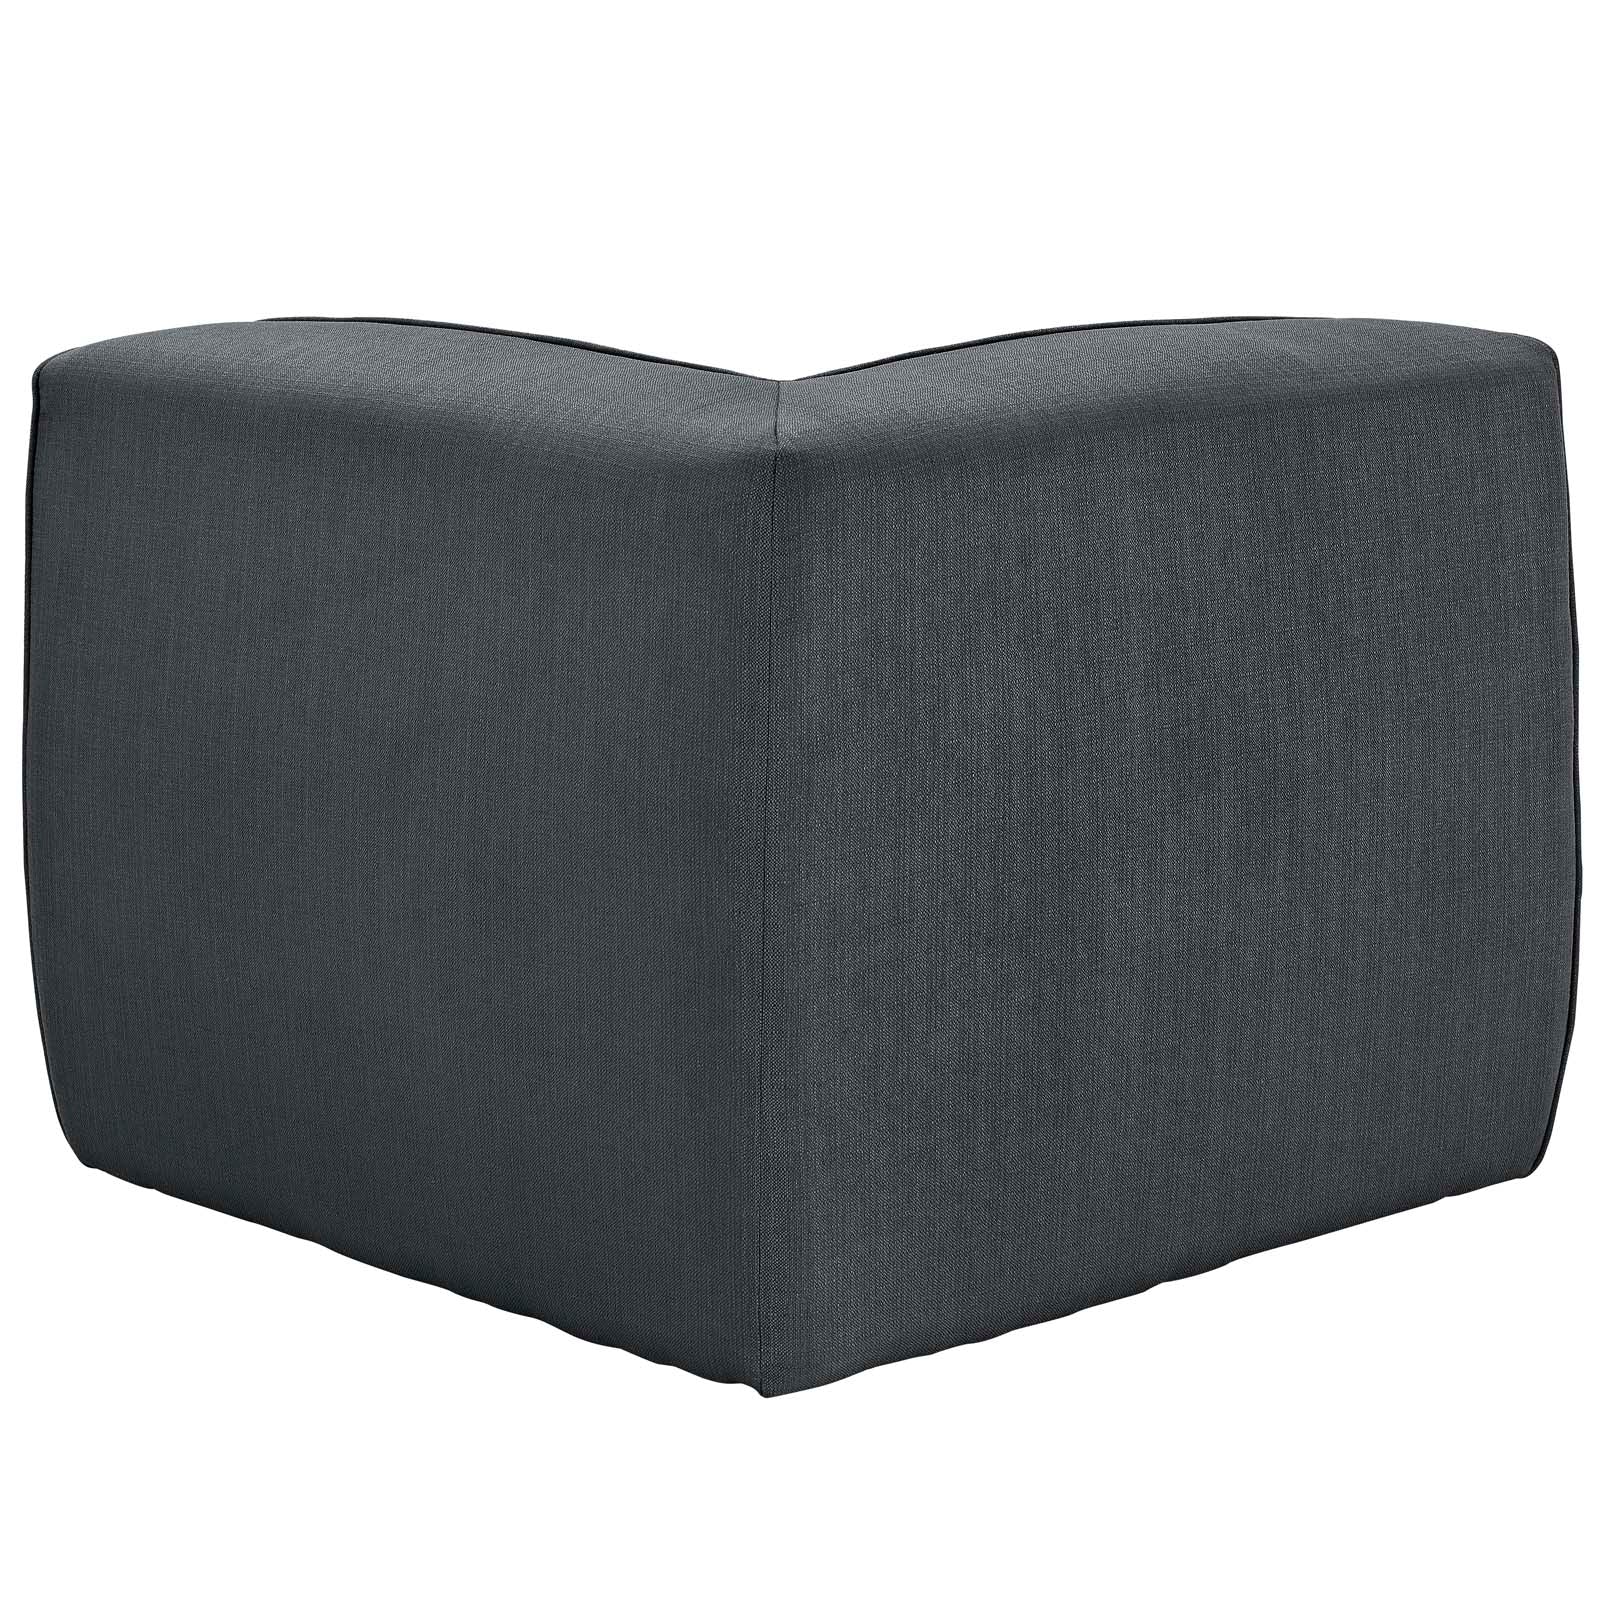 Modway Accent Chairs - Align Upholstered Fabric Corner Sofa Charcoal